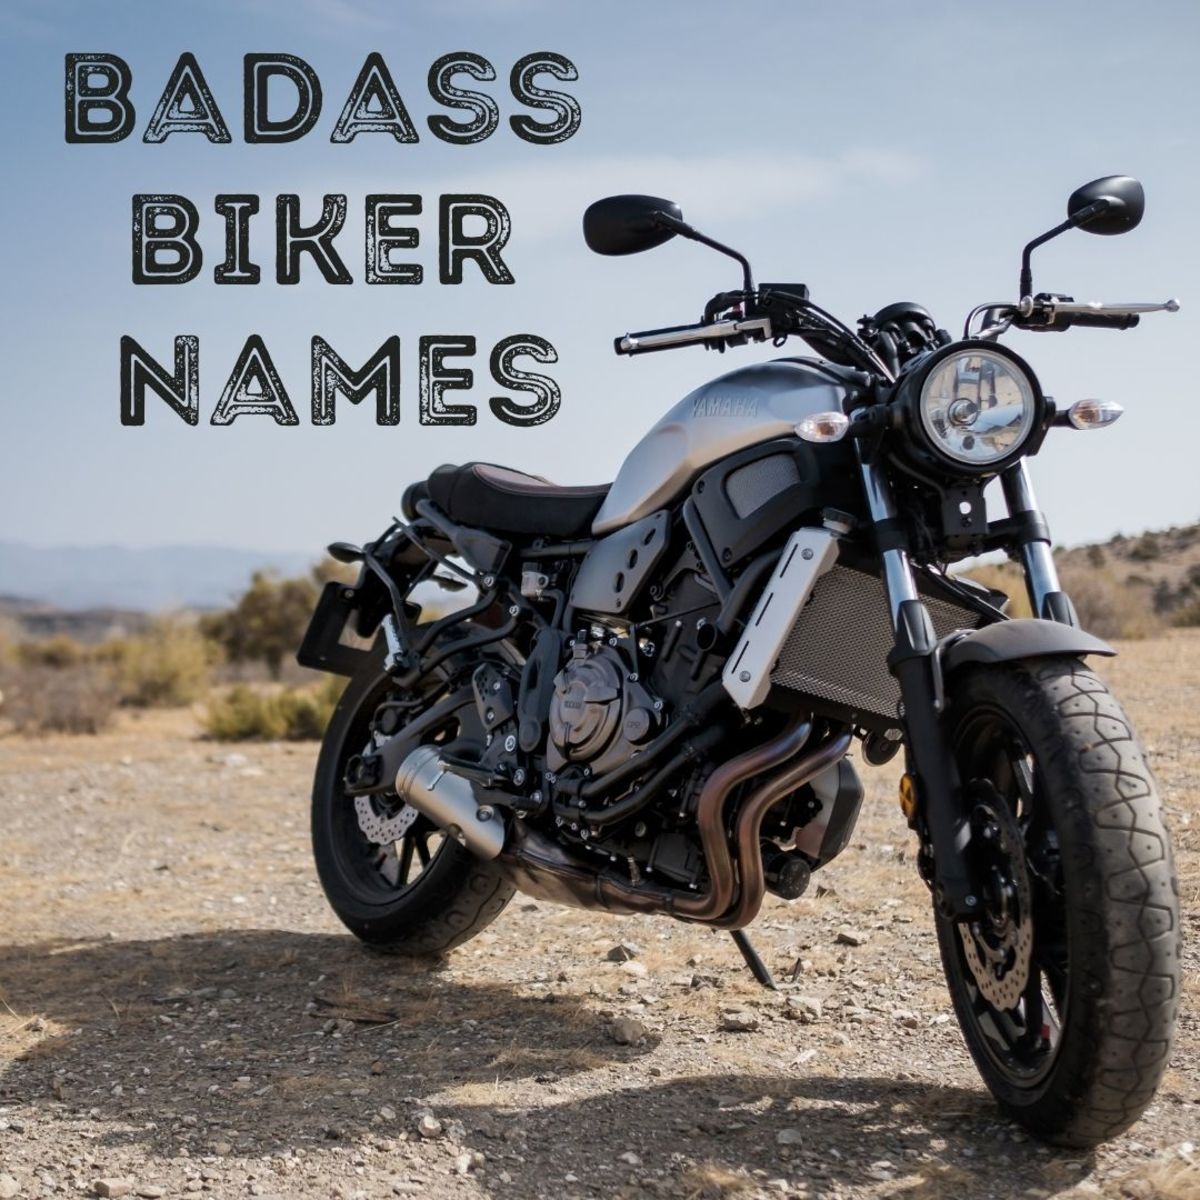 100+ biker name ideas that sound awesome and tell a story about you and your bike